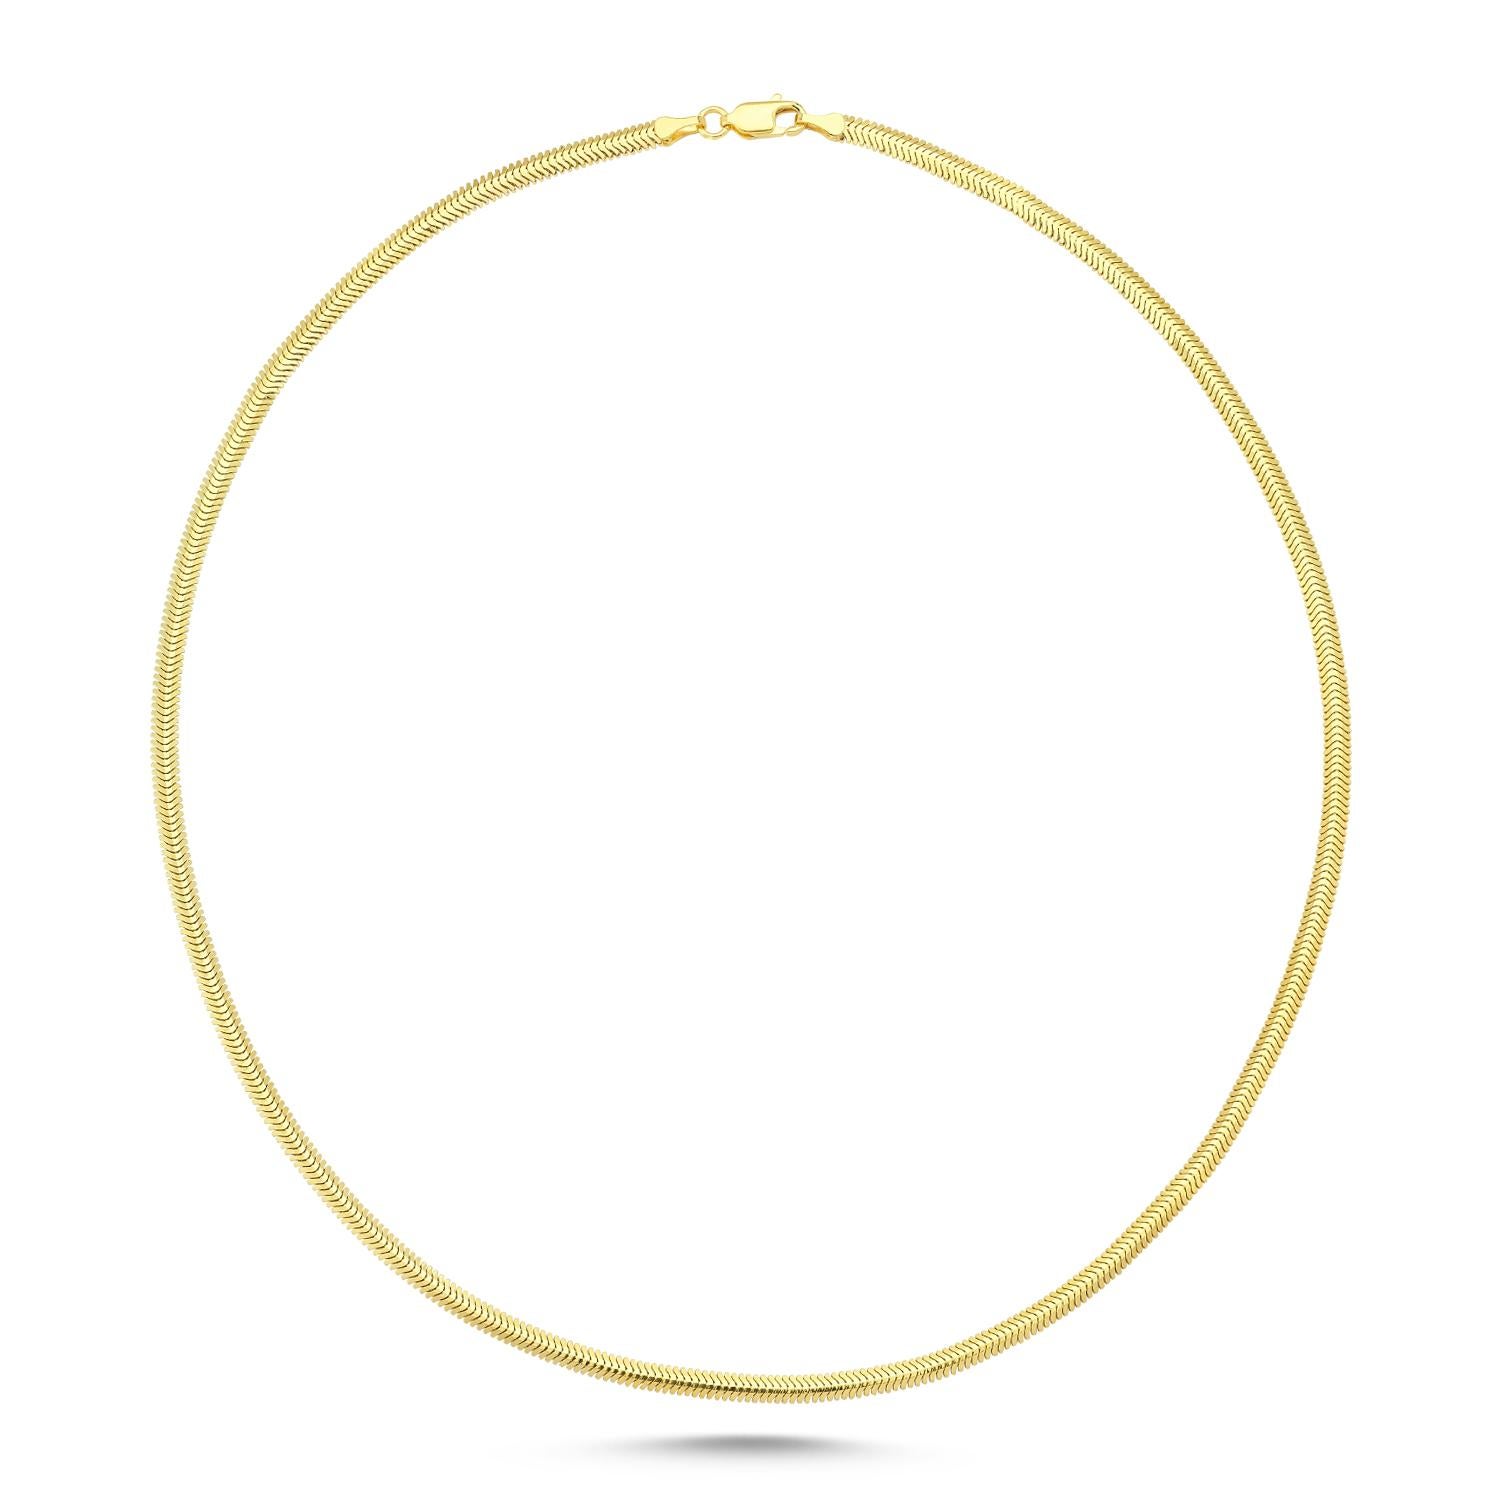 Snake chain necklace in 14k yellow gold by Selda Jewellery

Additional Information:-
Collection: Art Of Giving Collection
14k Yellow gold